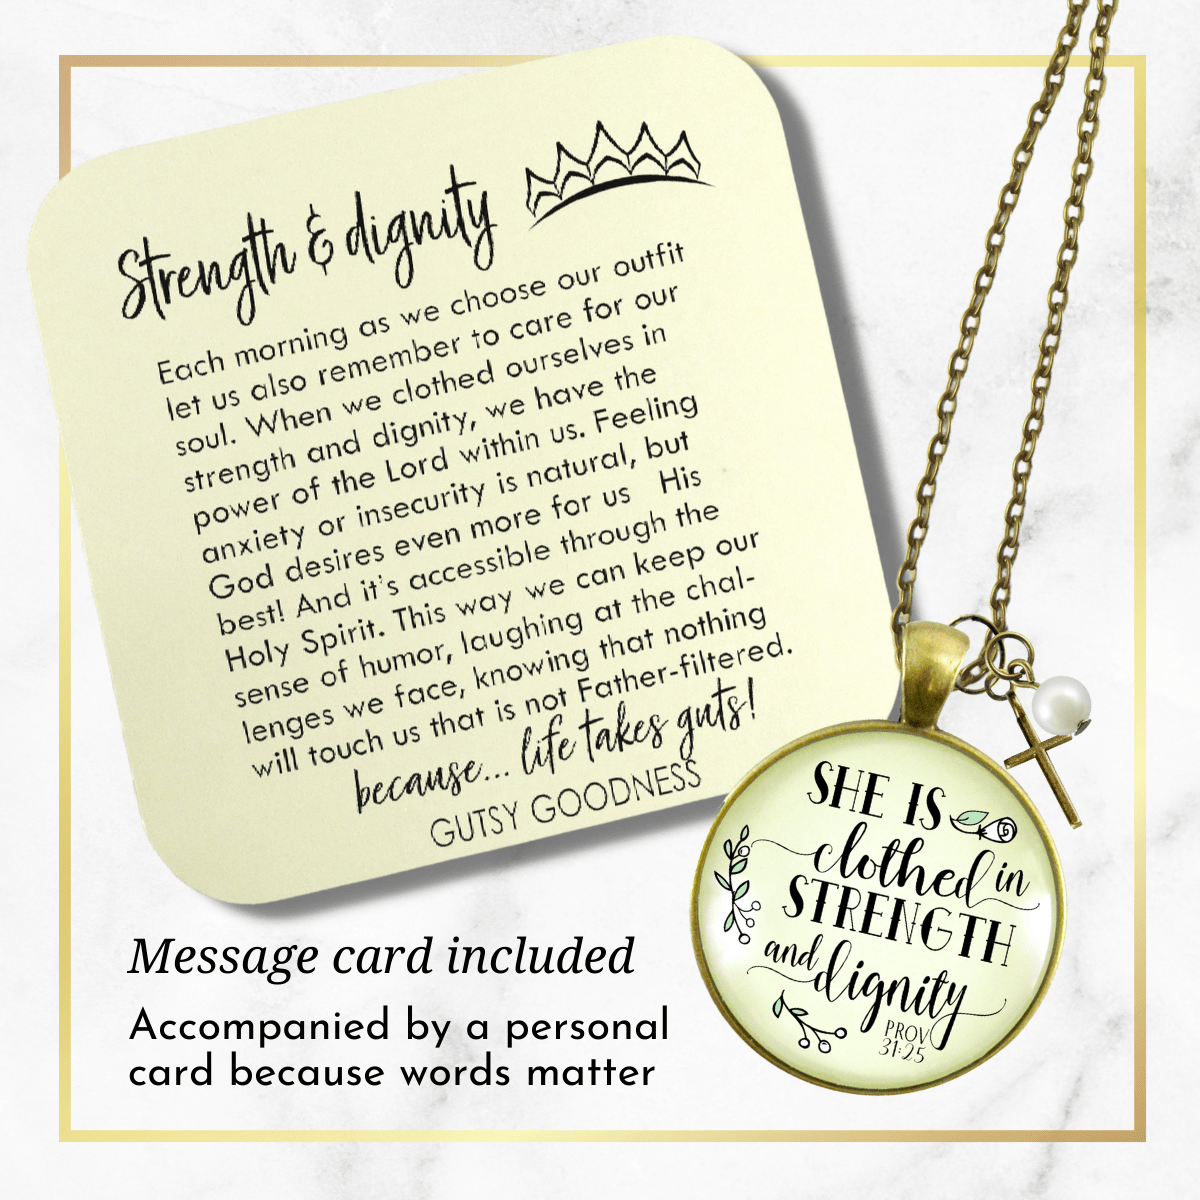 Gutsy Goodness Faith Necklace She Clothed Strength Dignity Women Truth Proverb 31 Believer Gift - Gutsy Goodness Handmade Jewelry;Faith Necklace She Clothed Strength Dignity Women Truth Proverb 31 Believer Gift - Gutsy Goodness Handmade Jewelry Gifts